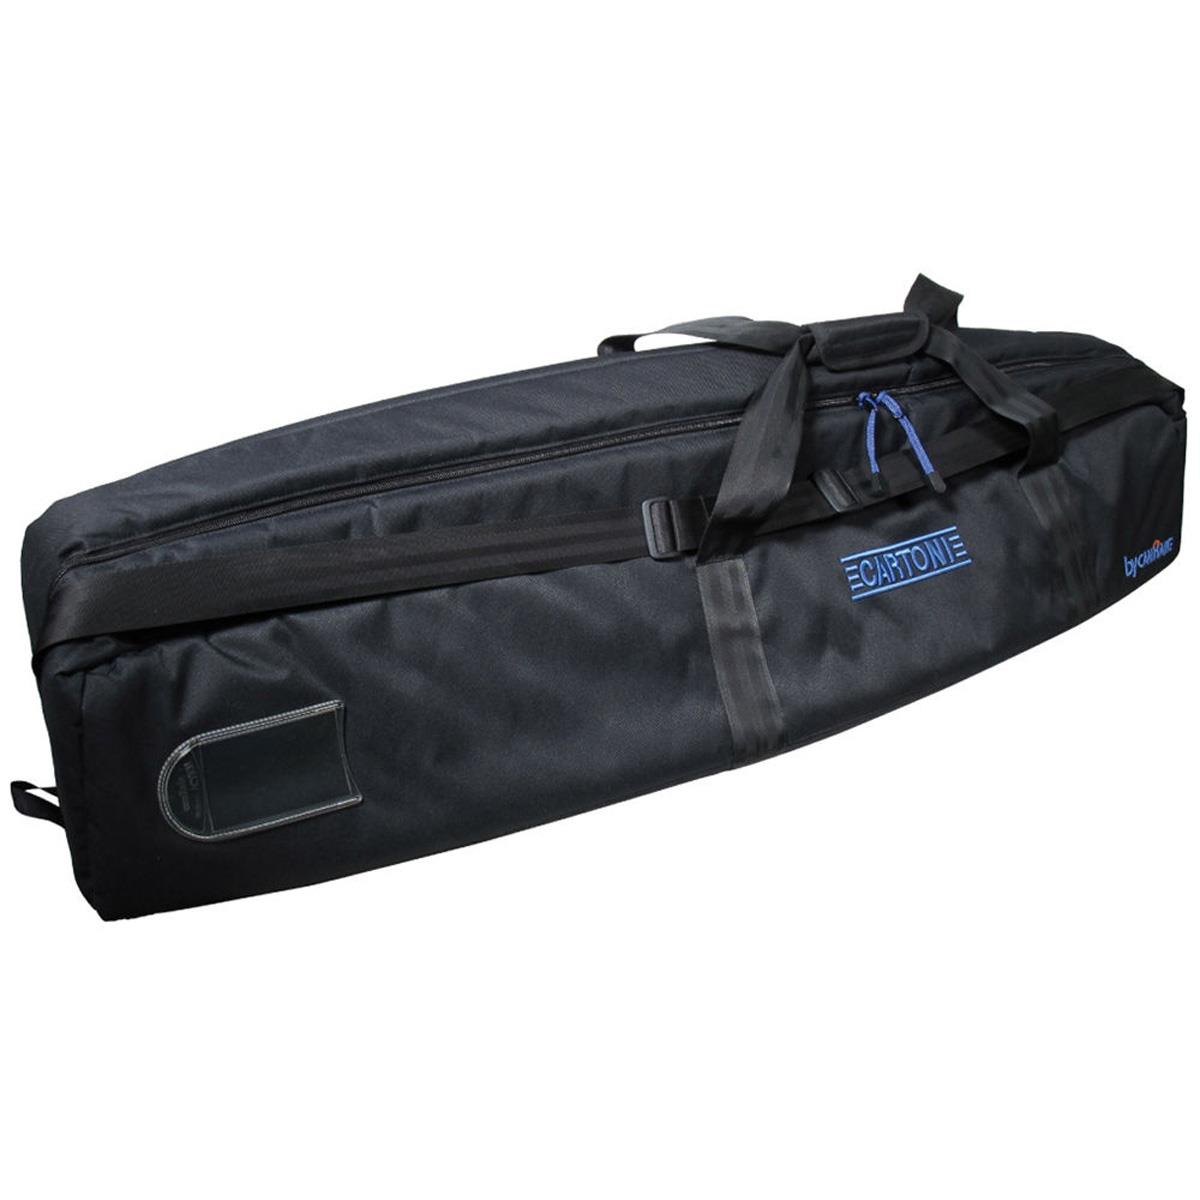 Image of Cartoni B410 Soft Carrying Case for Alfa and Beta 2